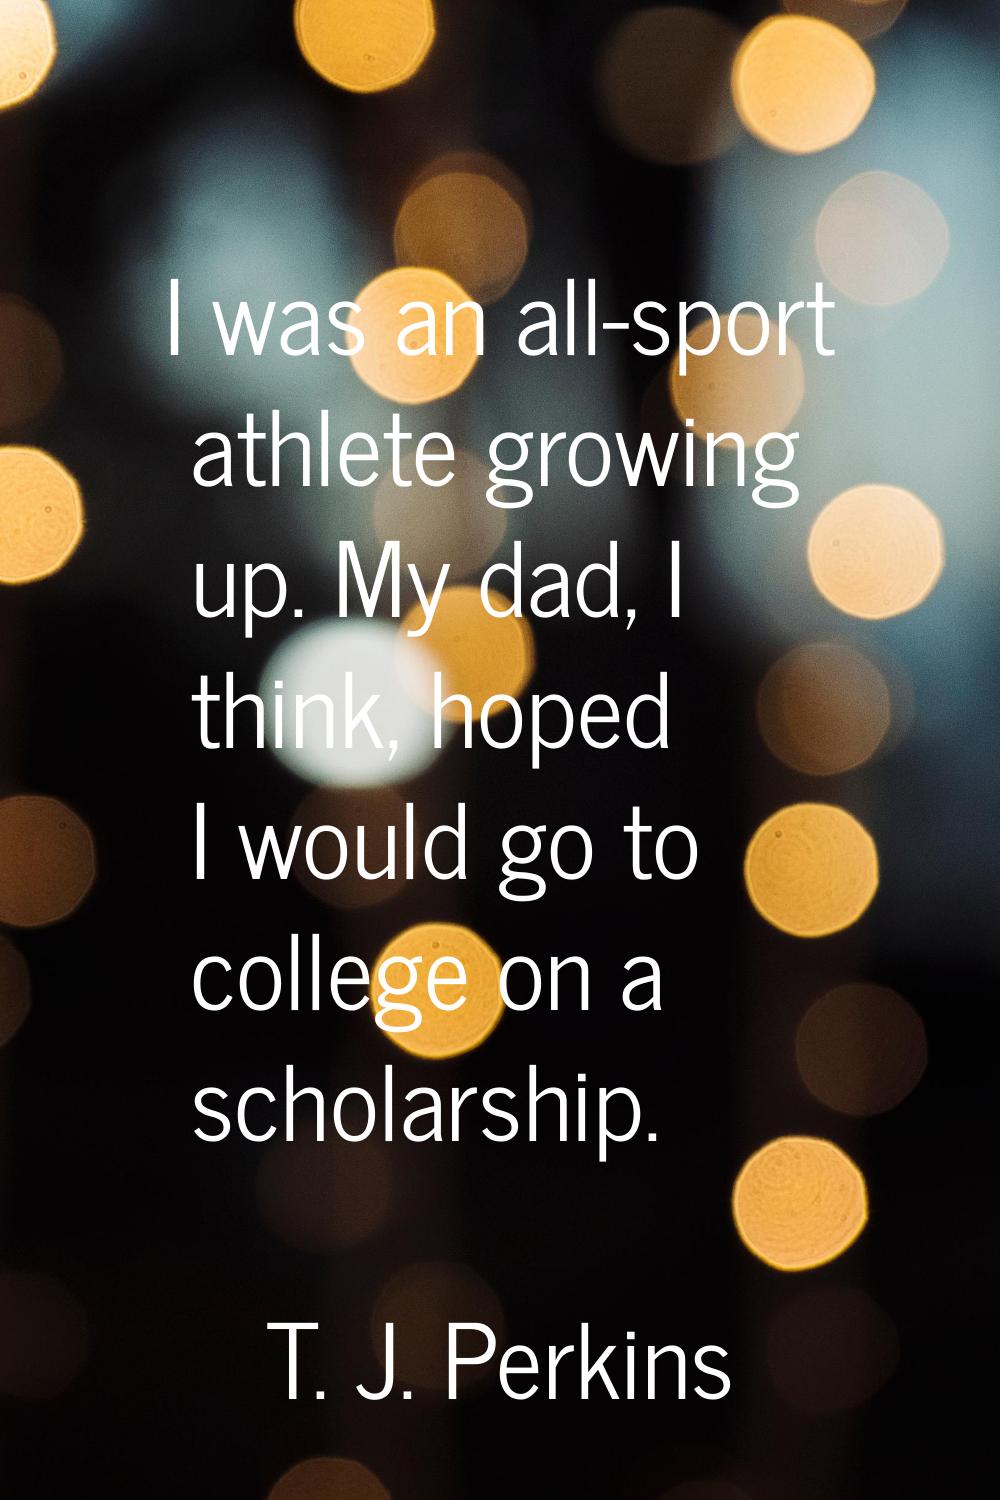 I was an all-sport athlete growing up. My dad, I think, hoped I would go to college on a scholarshi